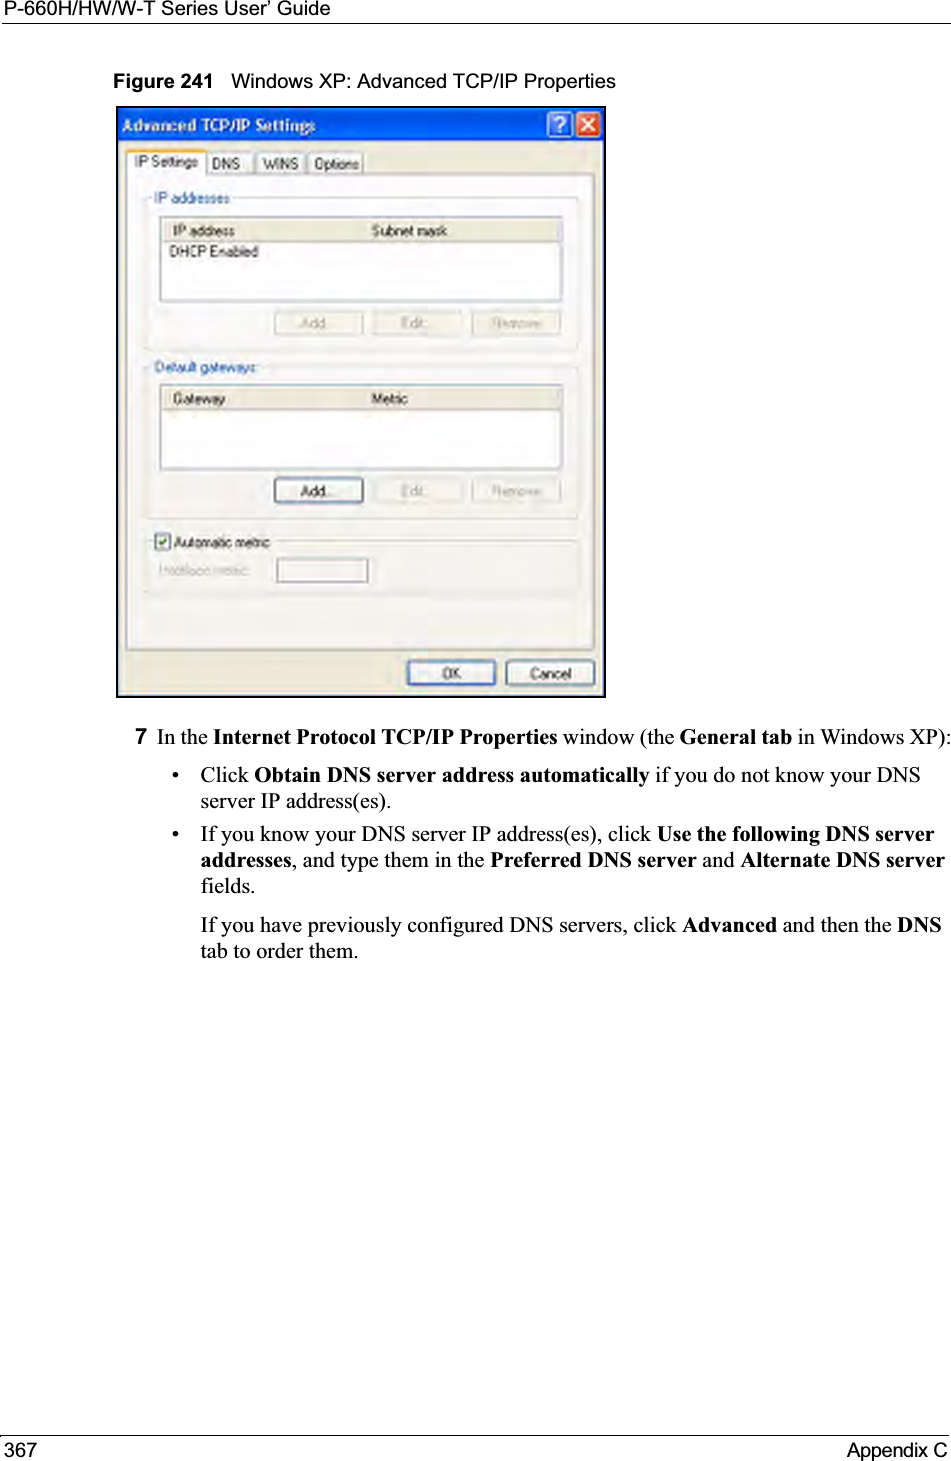 P-660H/HW/W-T Series User’ Guide367 Appendix CFigure 241   Windows XP: Advanced TCP/IP Properties7In the Internet Protocol TCP/IP Properties window (the General tab in Windows XP):• Click Obtain DNS server address automatically if you do not know your DNS server IP address(es).• If you know your DNS server IP address(es), click Use the following DNS server addresses, and type them in the Preferred DNS server and Alternate DNS serverfields.If you have previously configured DNS servers, click Advanced and then the DNStab to order them.